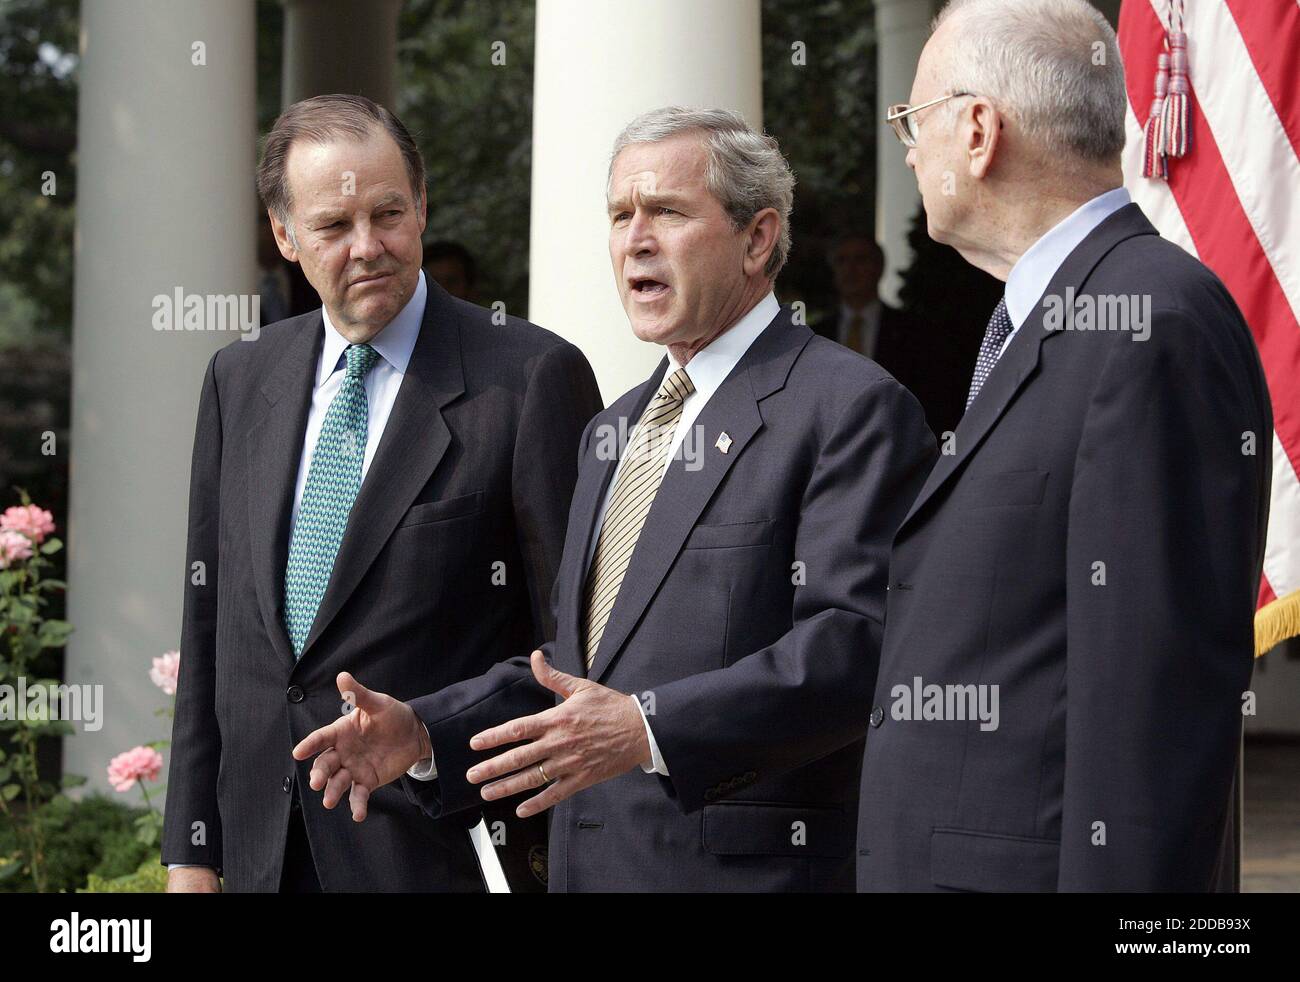 NO FILM, NO VIDEO, NO TV, NO DOCUMENTARY - President George W. Bush receives the 9/11 Commission final report from 9/11 Commission Chairman Thomas H. Kean (l) and Vice Chairman Lee H. Hamilton in the Rose Garden of the White House in Washington, D.C., on July 22, 2004. The commission's report detailed 'deep institutional failings' and missed opportunities by both the Bush and Clinton administrations to thwart the terrorist hijackings on September 11, 2001. Photo by Chuck Kennedy/KRT/ABACA. Stock Photo